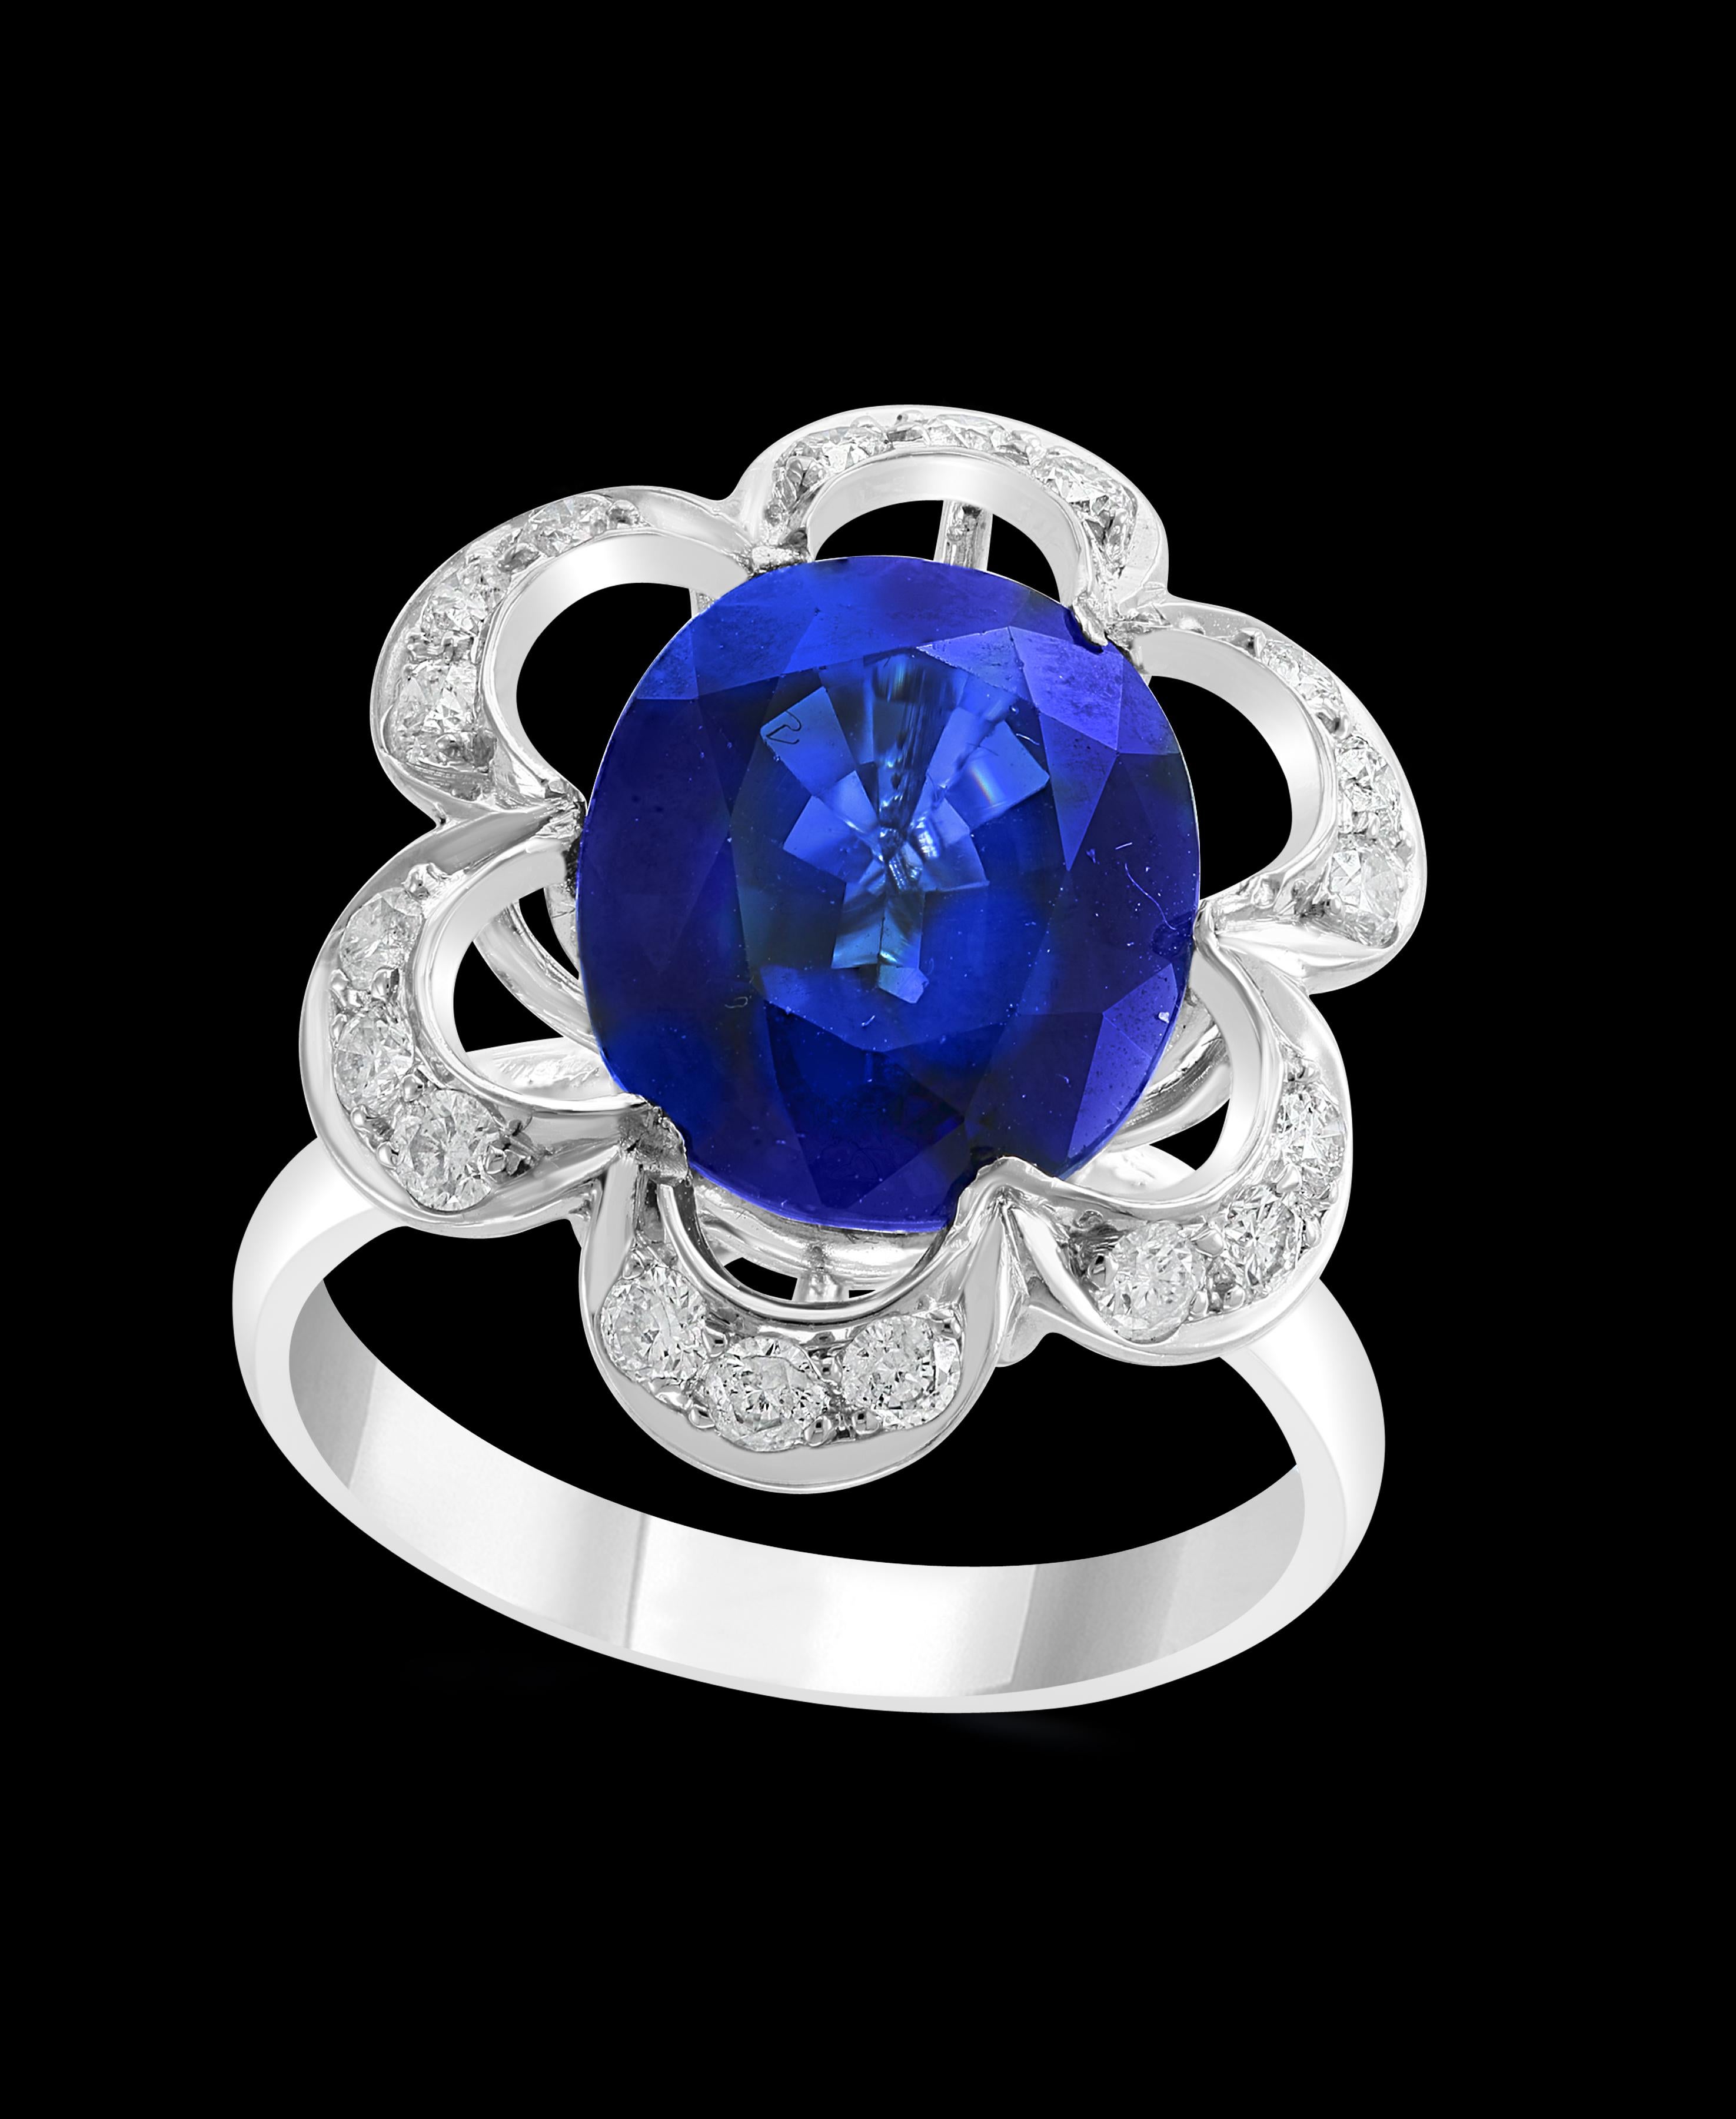 
5 Carat  Diffused Blue Sapphire & Diamond 18 Karat  White Gold Cocktail Ring
5 Carat of Diffused  blue Sapphire in Oval Shape
Total Diamond Weight of  brilliant  Round cut diamonds approximately 0.65 carats
Gold : 18 Karat White Gold 8 Gm
Ring size